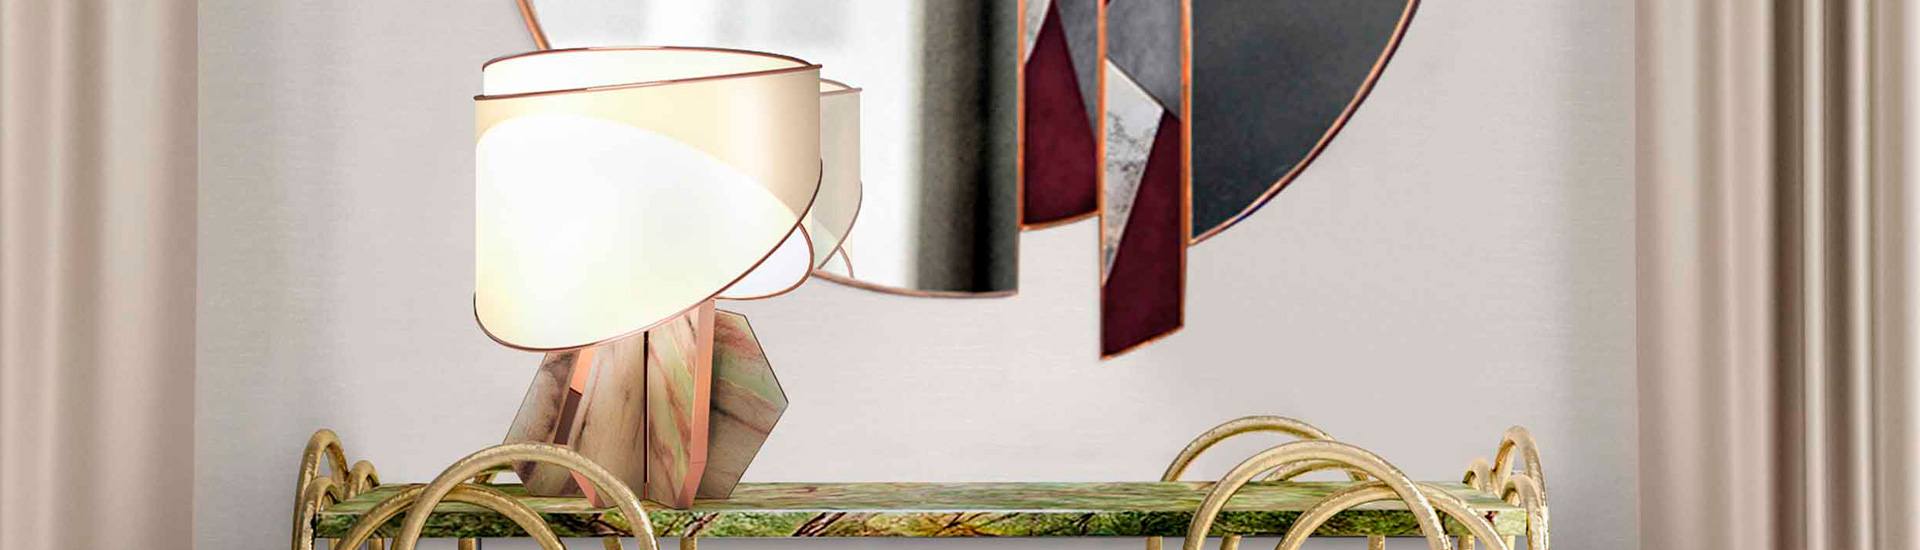 Origami Large Sconce wall lamp